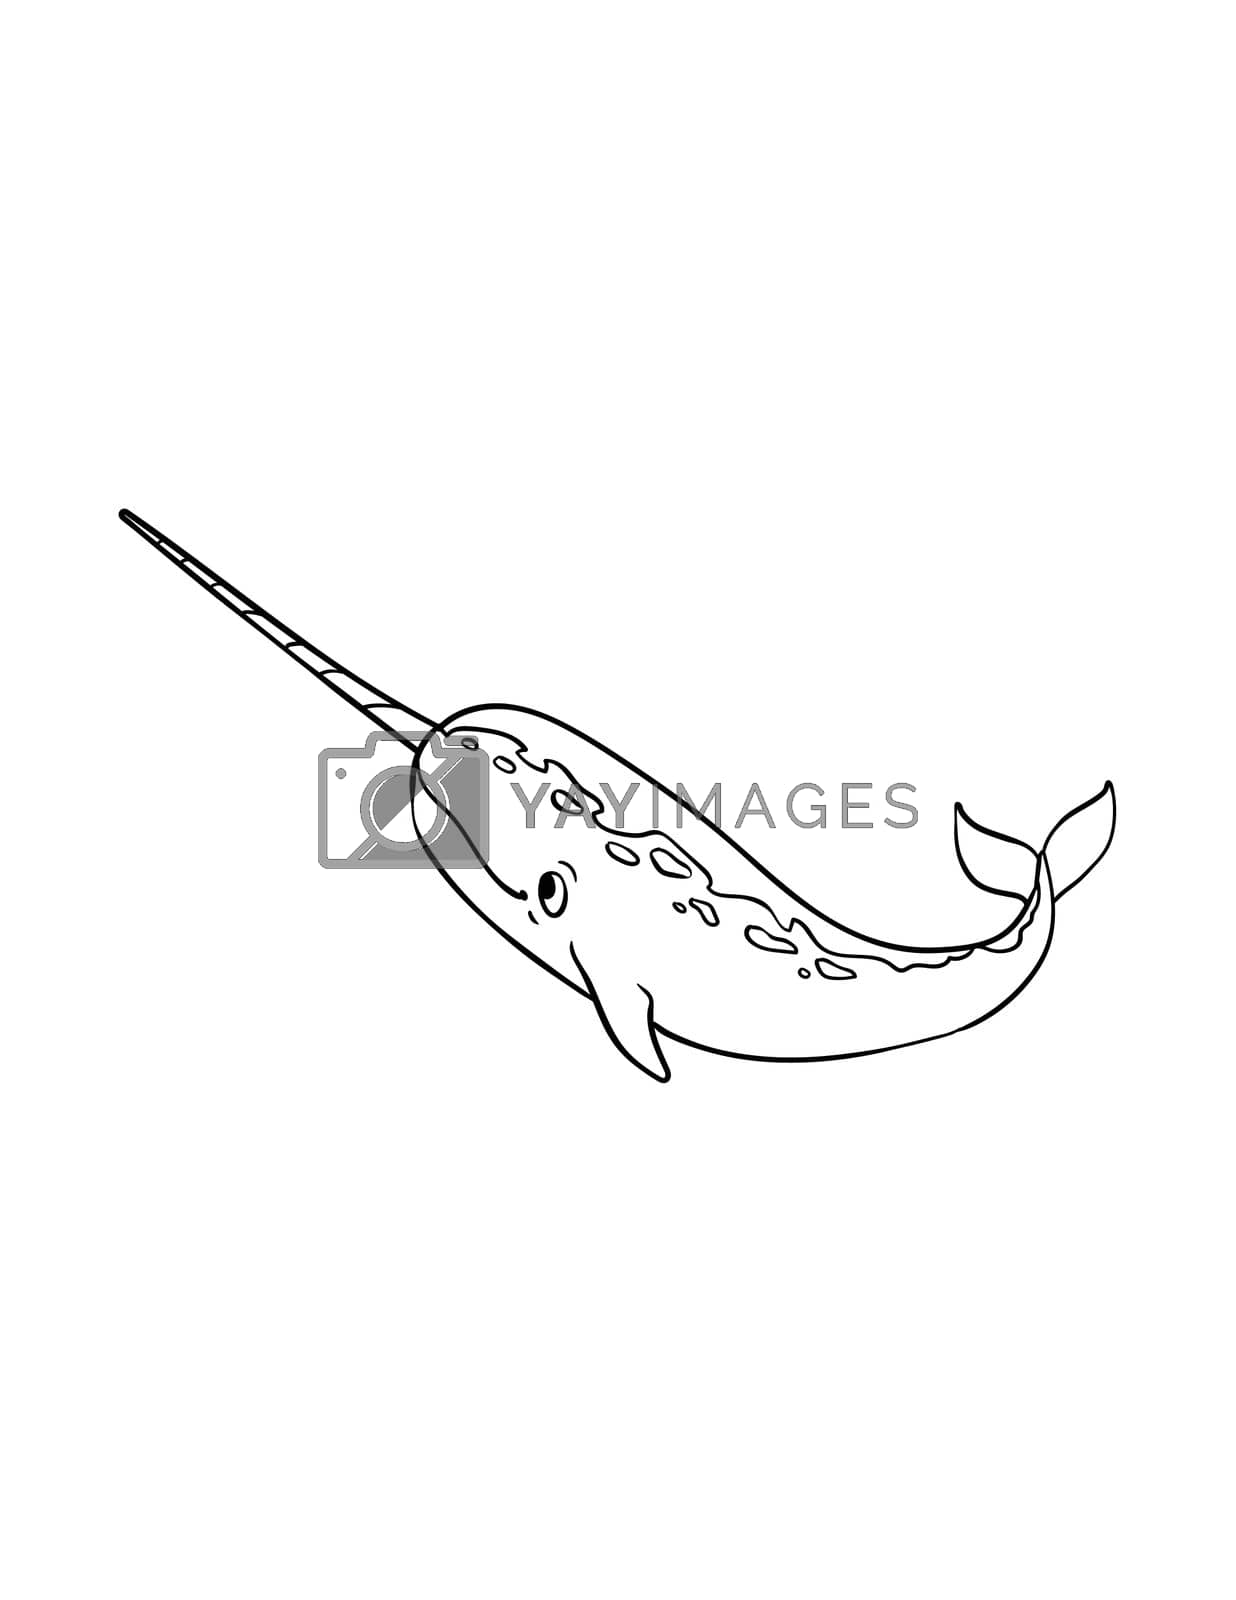 Royalty free image of Narwhal Isolated Coloring Page for Kids by abbydesign